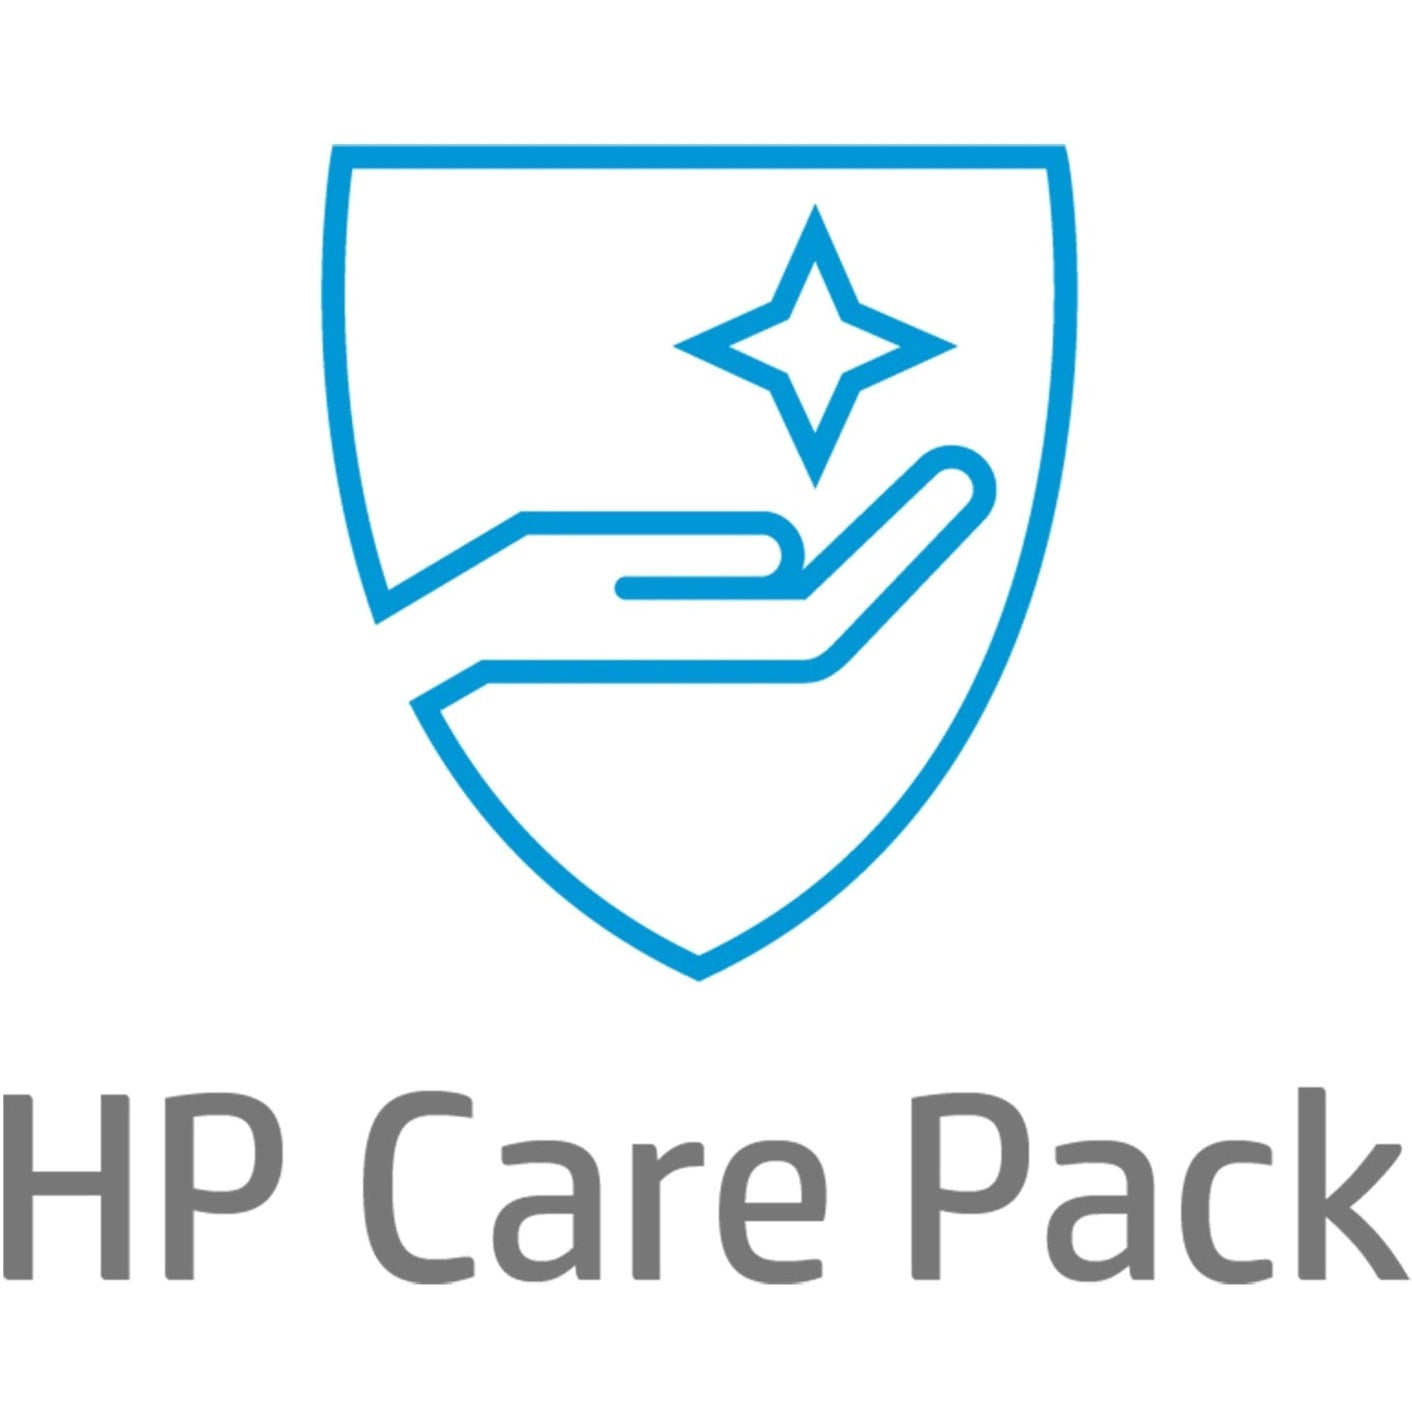 HP Care Pack - Extended Service - 3 Year - Service (U9BA6E)